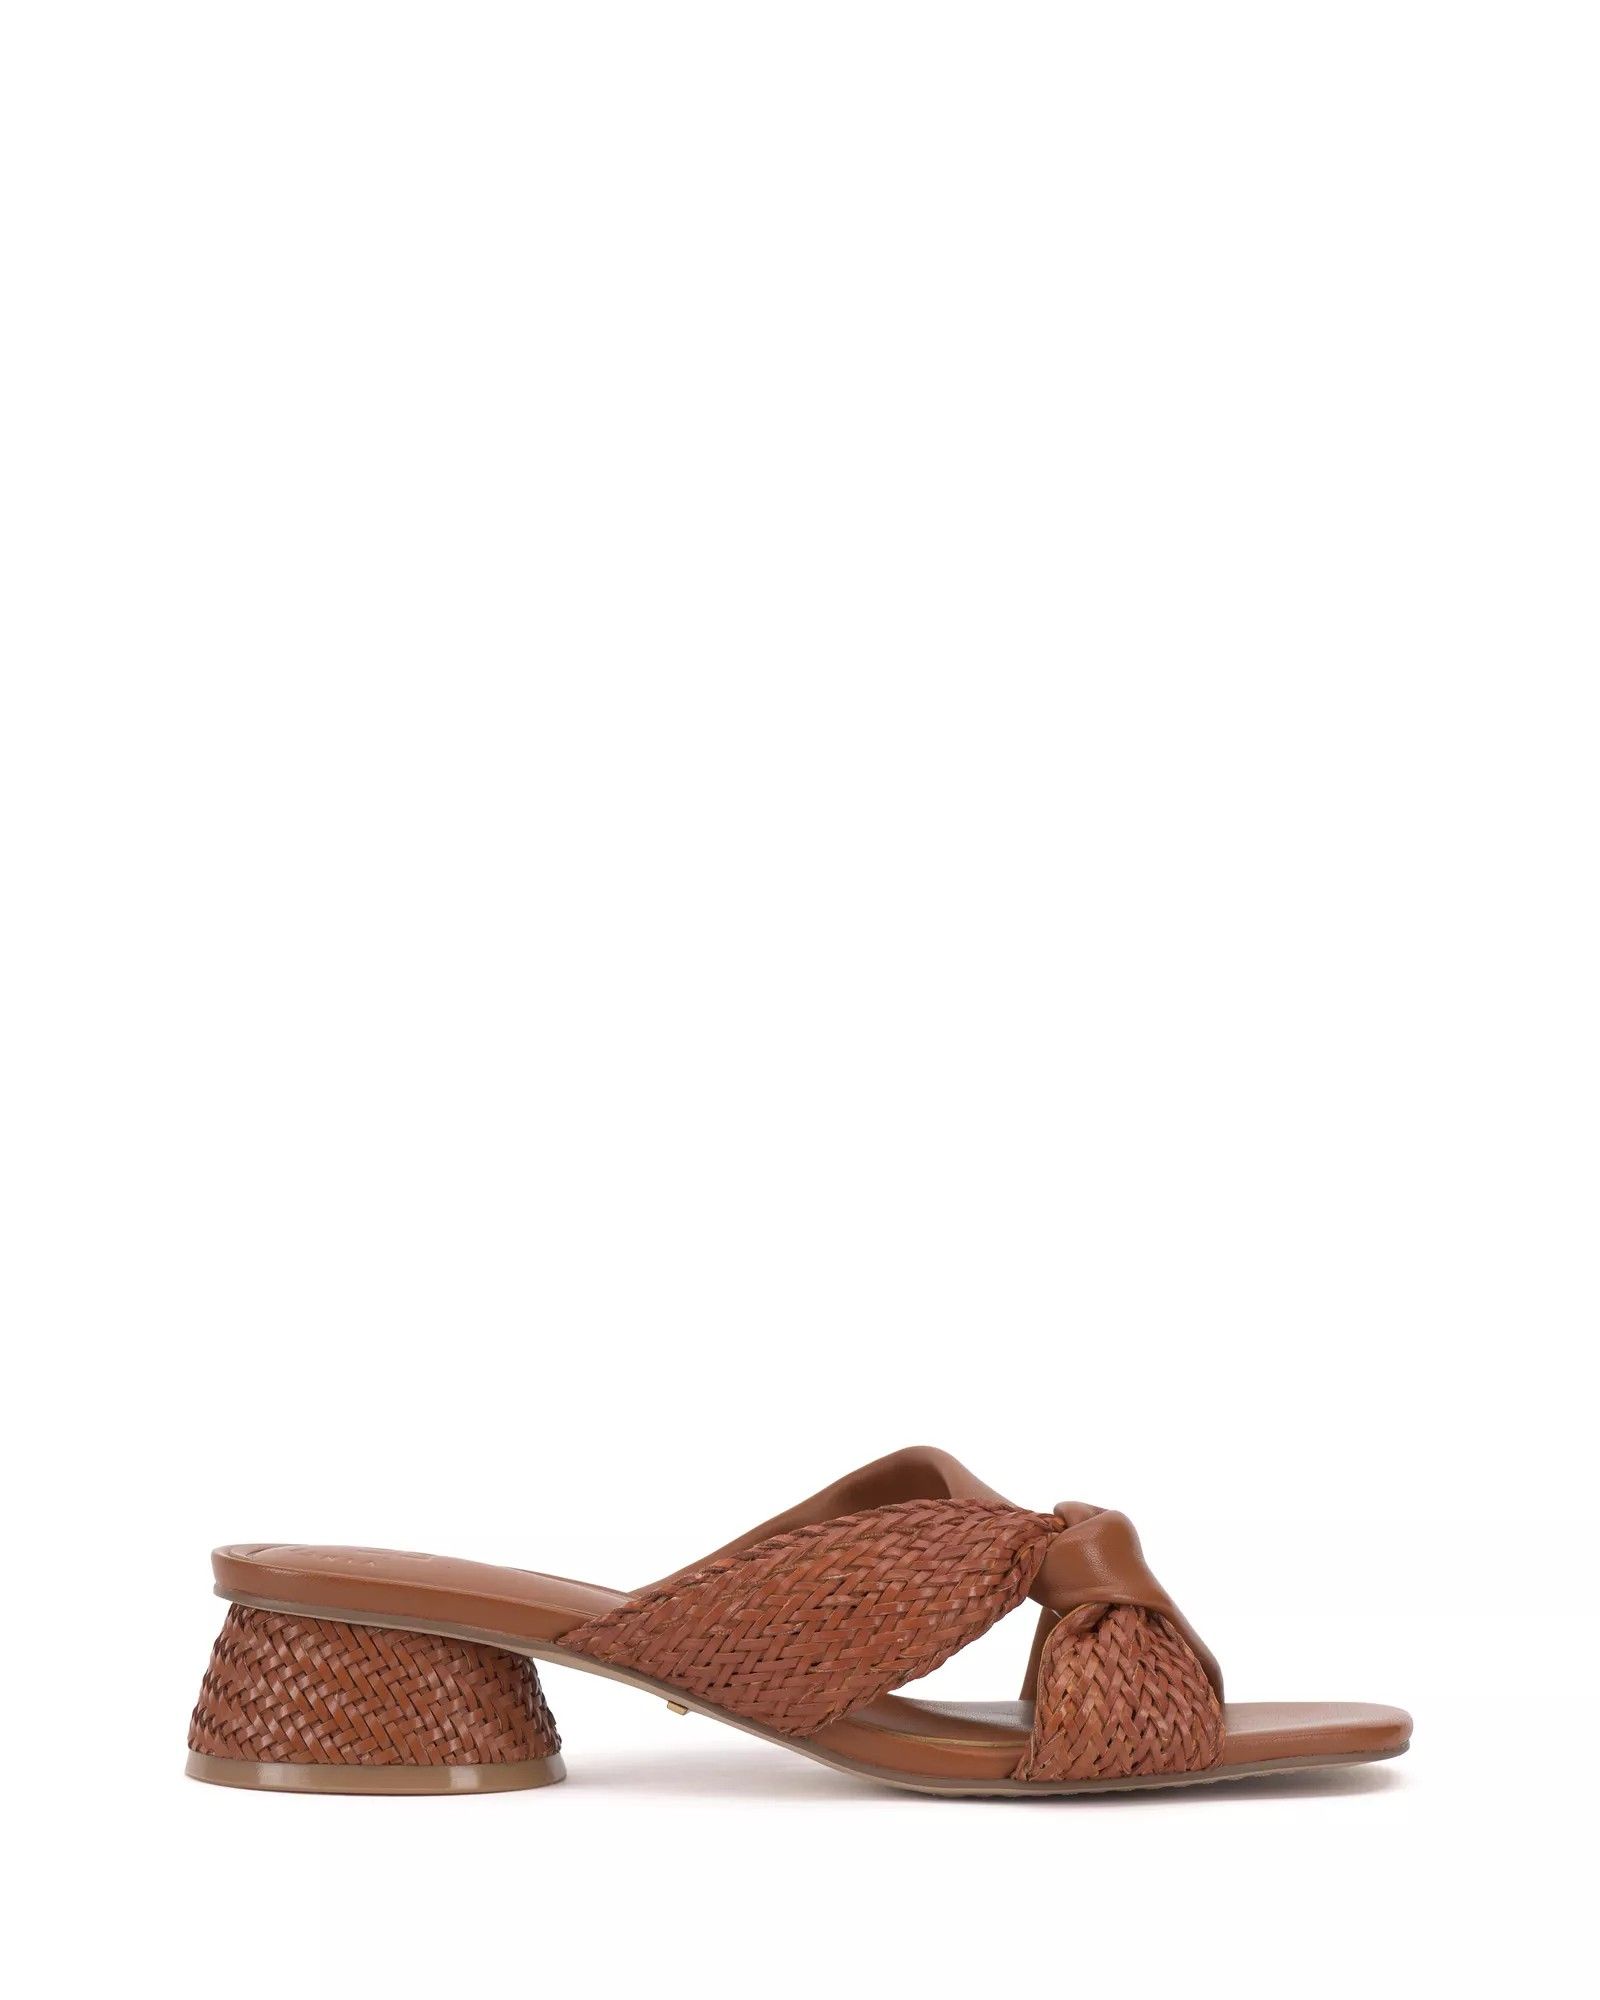 Vince Camuto x Laura Beverlin Willow Sandal | Vince Camuto